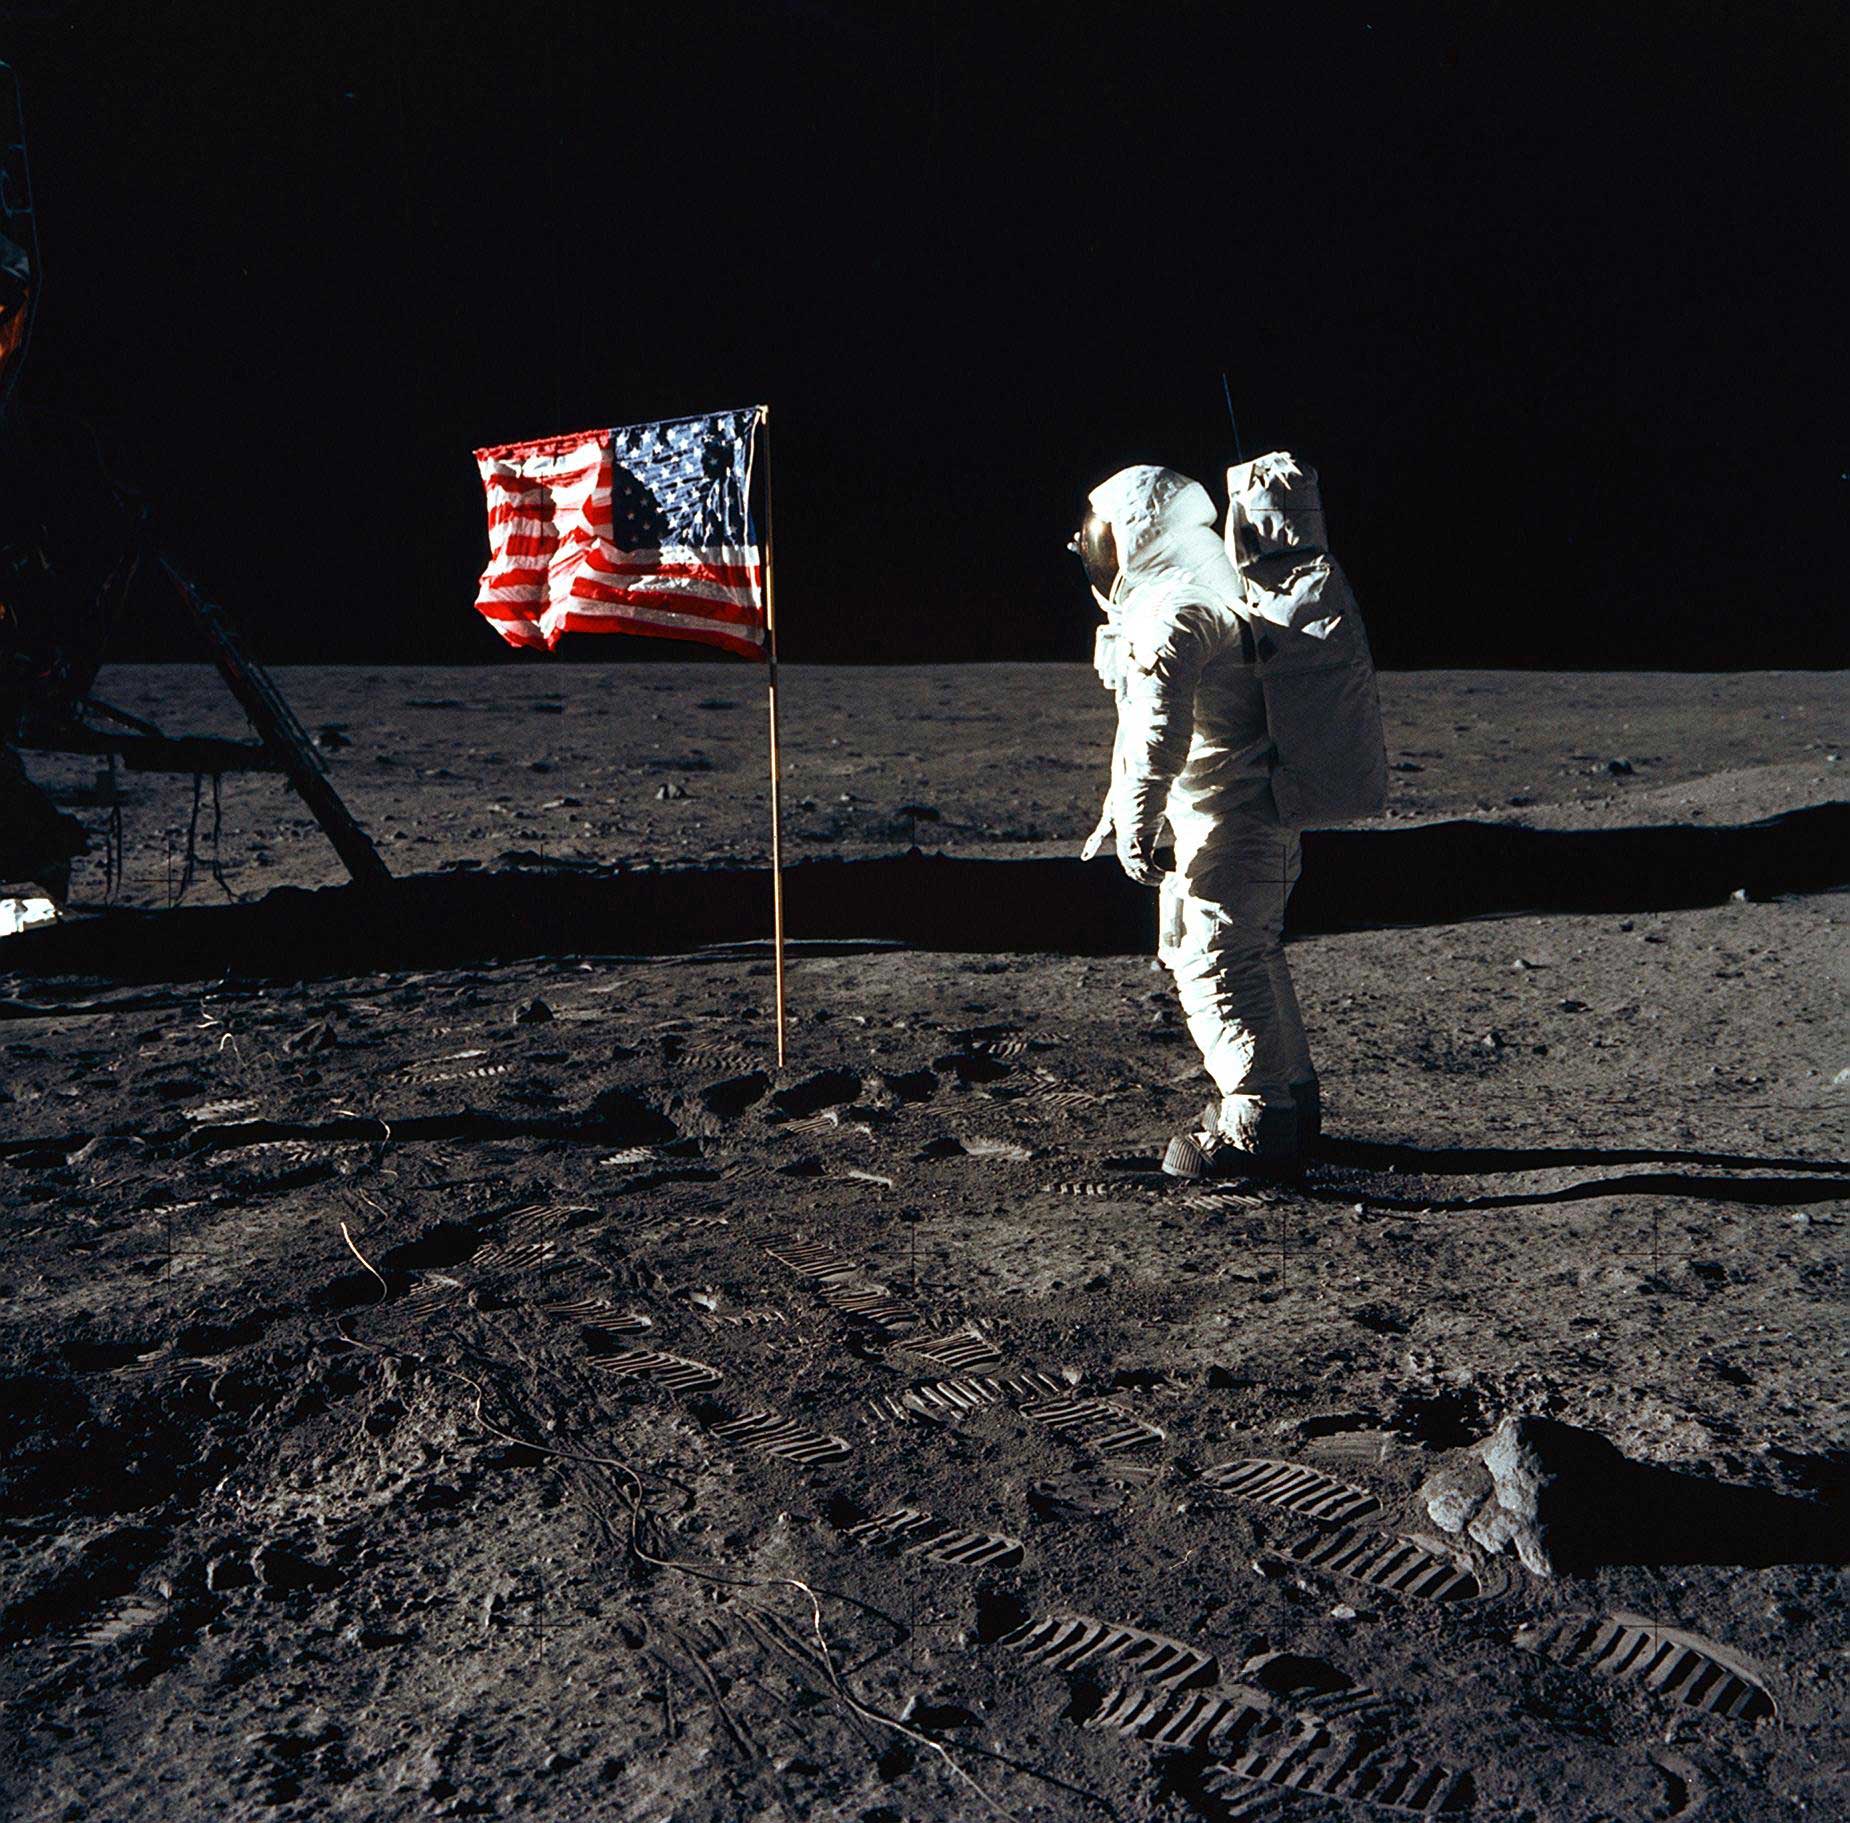 Astronaut Buzz Aldrin, lunar module pilot of the first lunar landing mission, poses for a photograph beside the deployed United States flag during an Apollo 11 Extravehicular Activity (EVA) on the lunar surface.